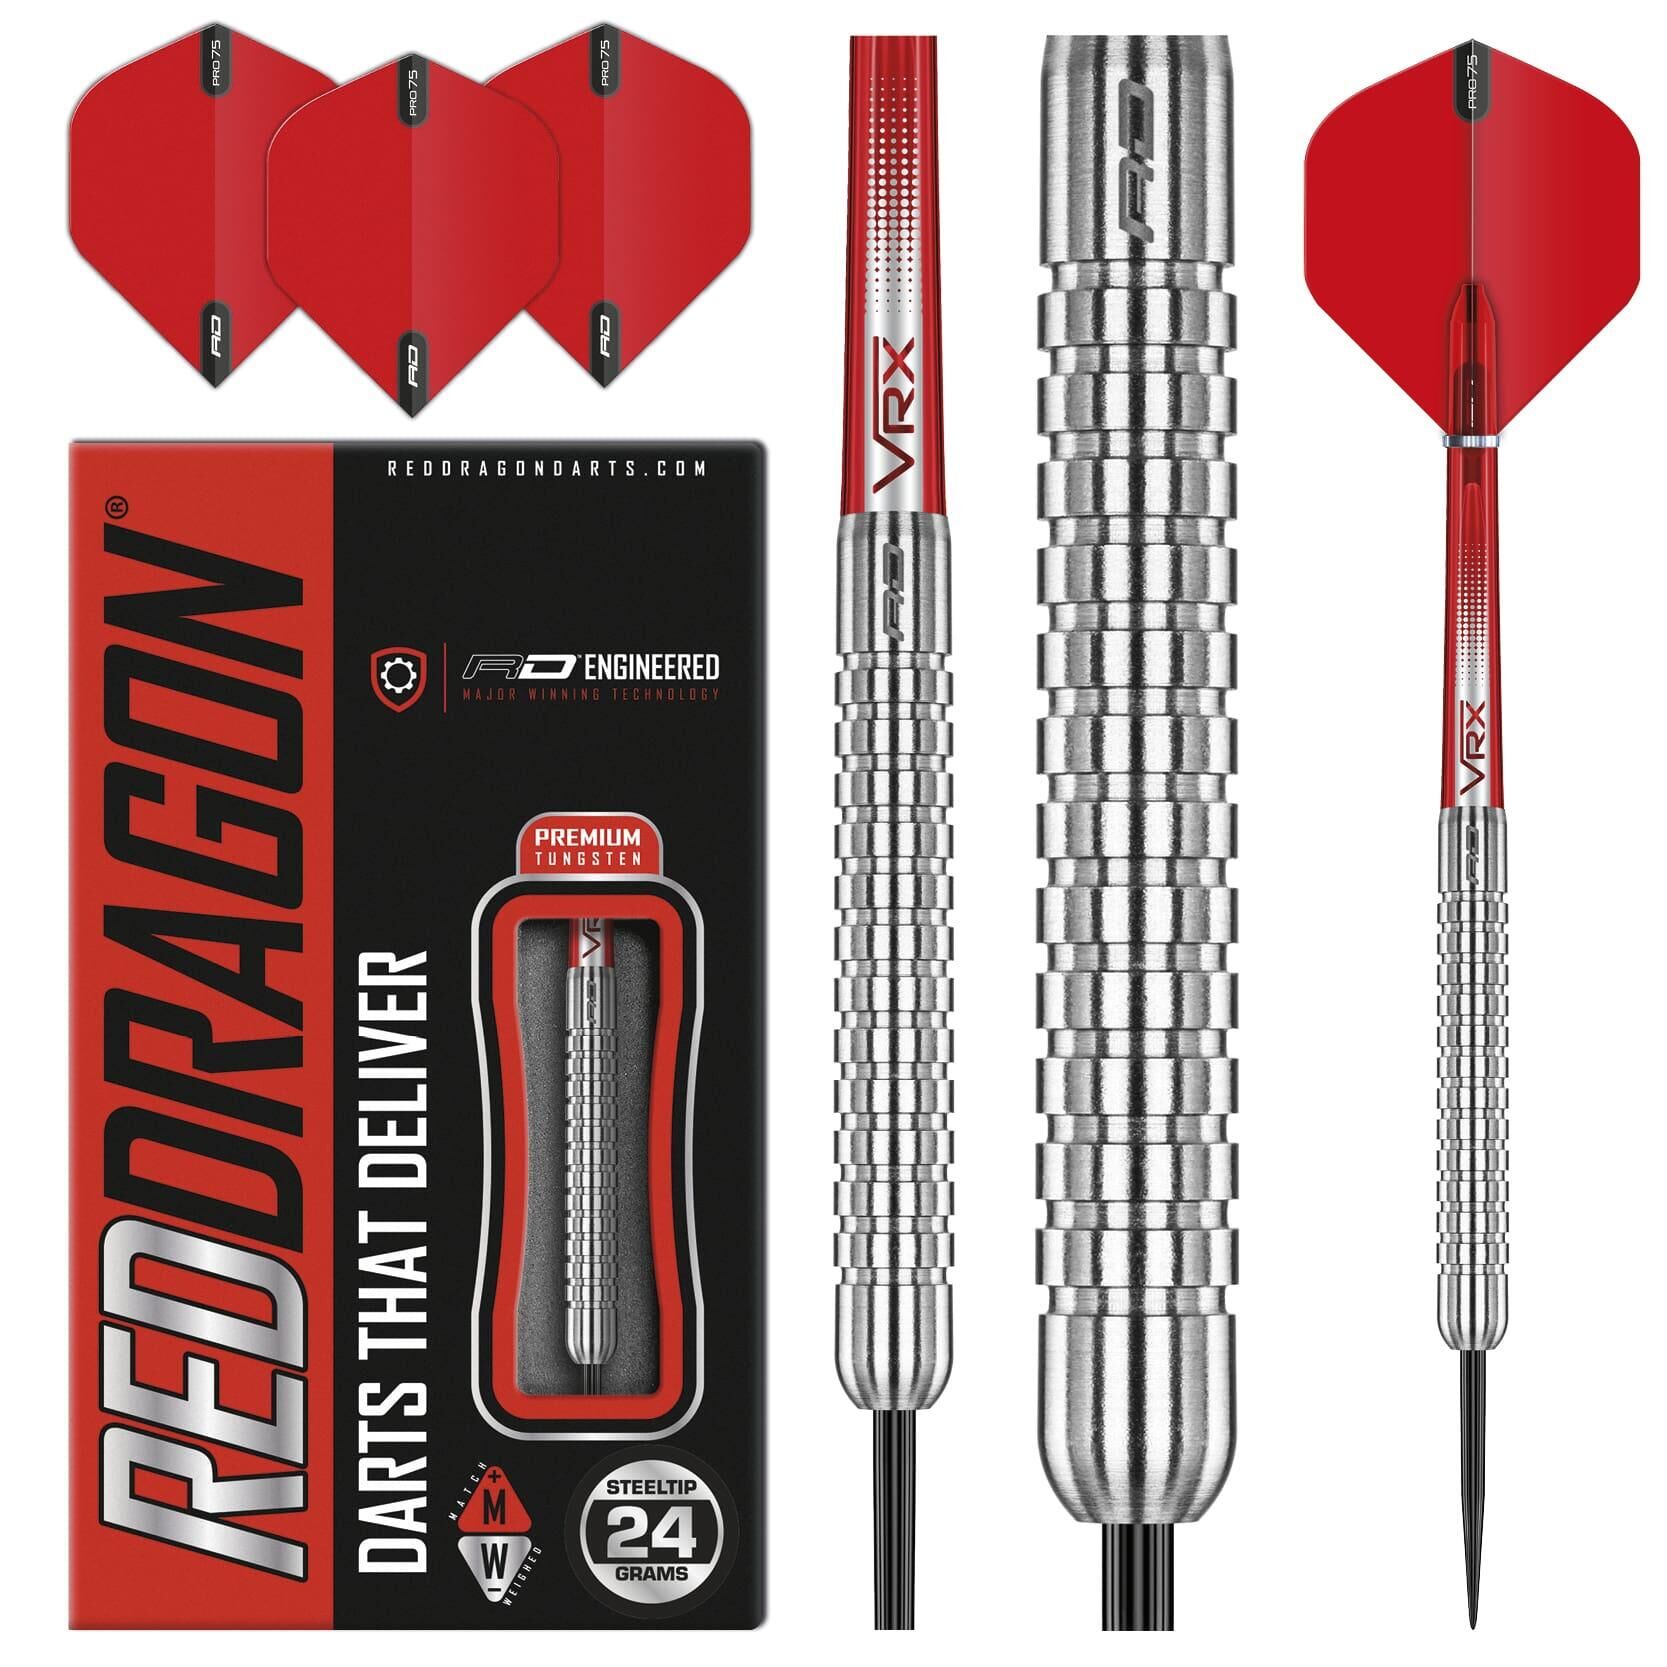 RED DRAGON DARTS RED DRAGON Hell Fire A 24 gram Tungsten Darts Set with Flights and Stems